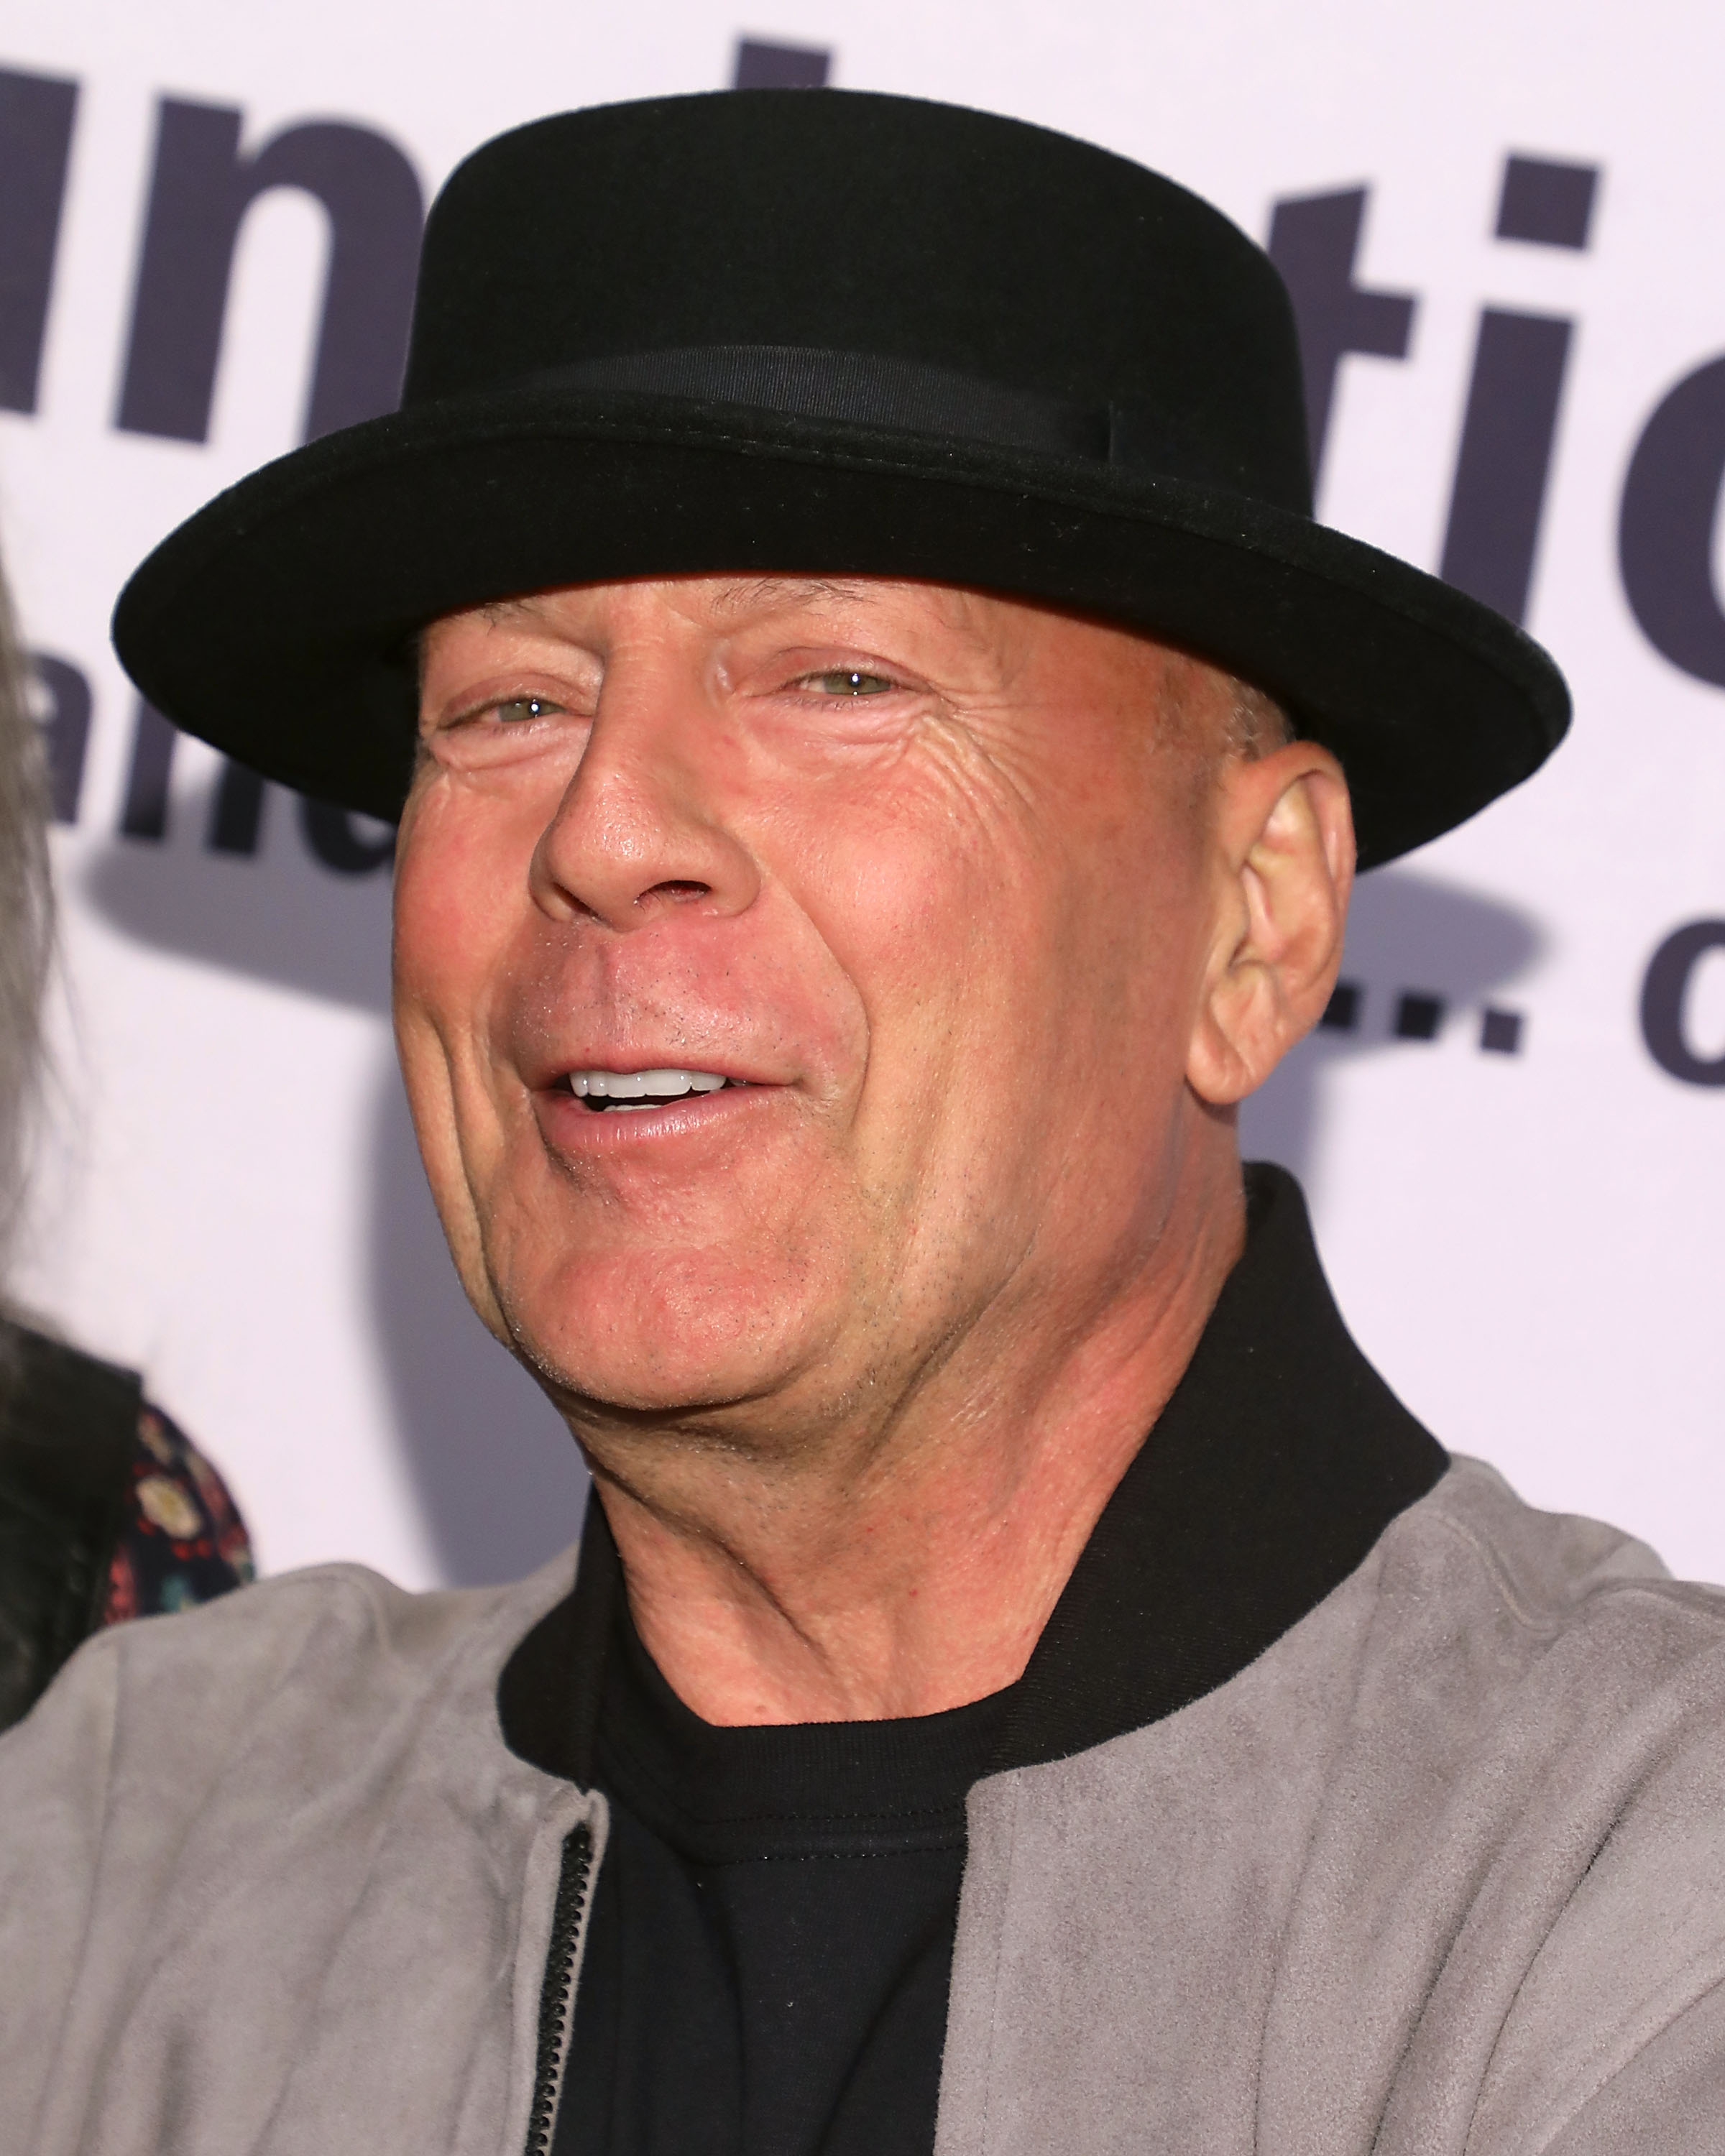 Bruce Willis at the 17th annual "A Great Night in Harlem" at The Apollo Theater, New York City, April 4, 2019 | Source: Getty Images